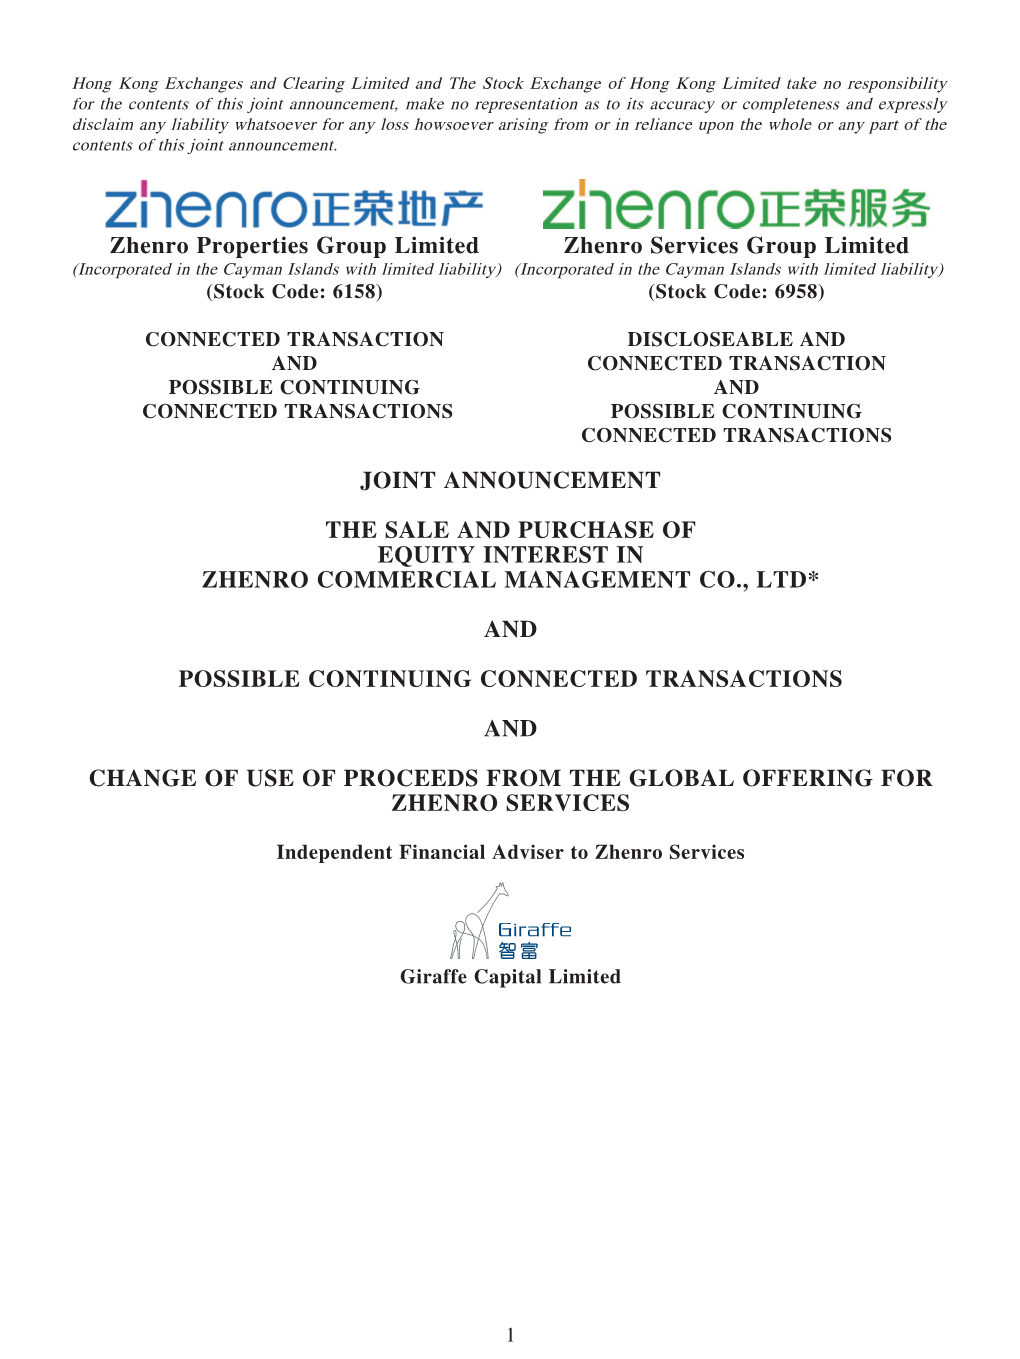 The Sale and Purchase of Equity Interest in Zhenro Commercial Management Co., Ltd*